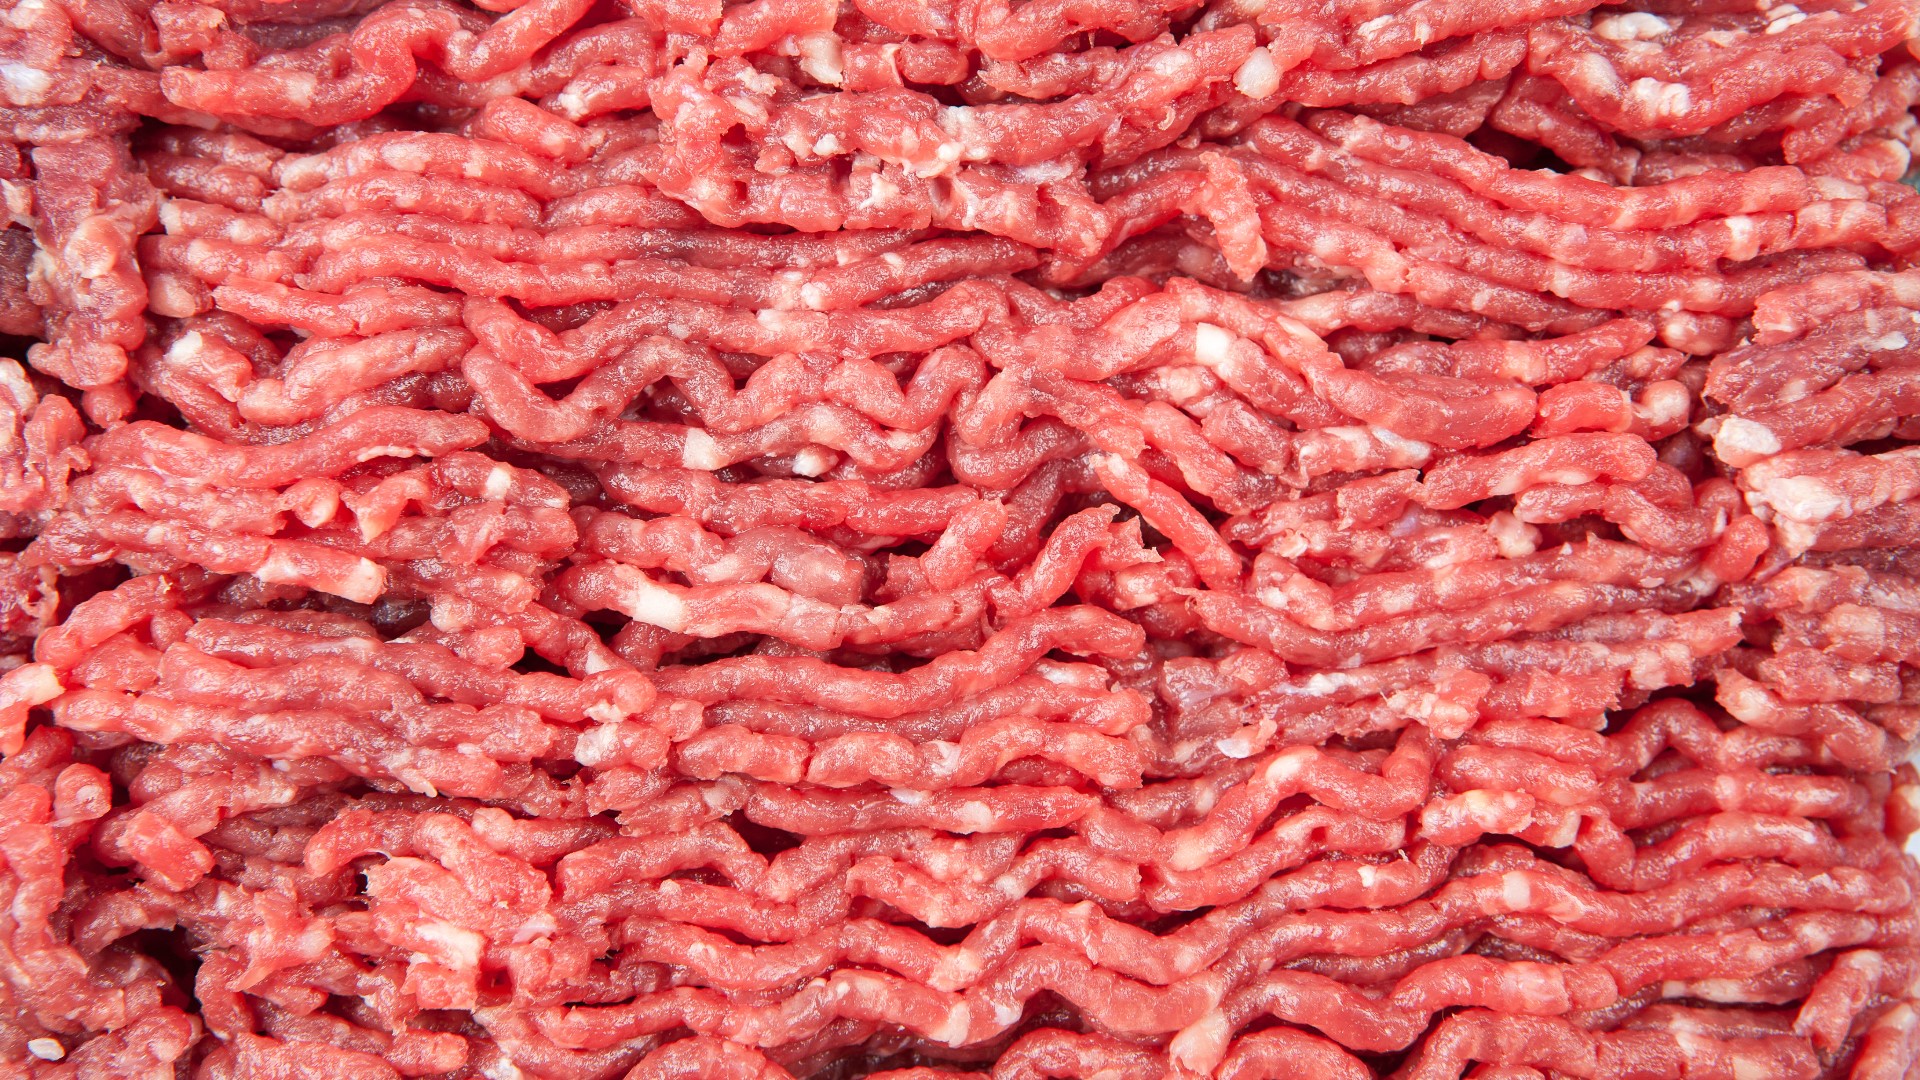 There is a nationwide recall for 16,000 pounds of raw ground beef that could be contaminated with E. coli.